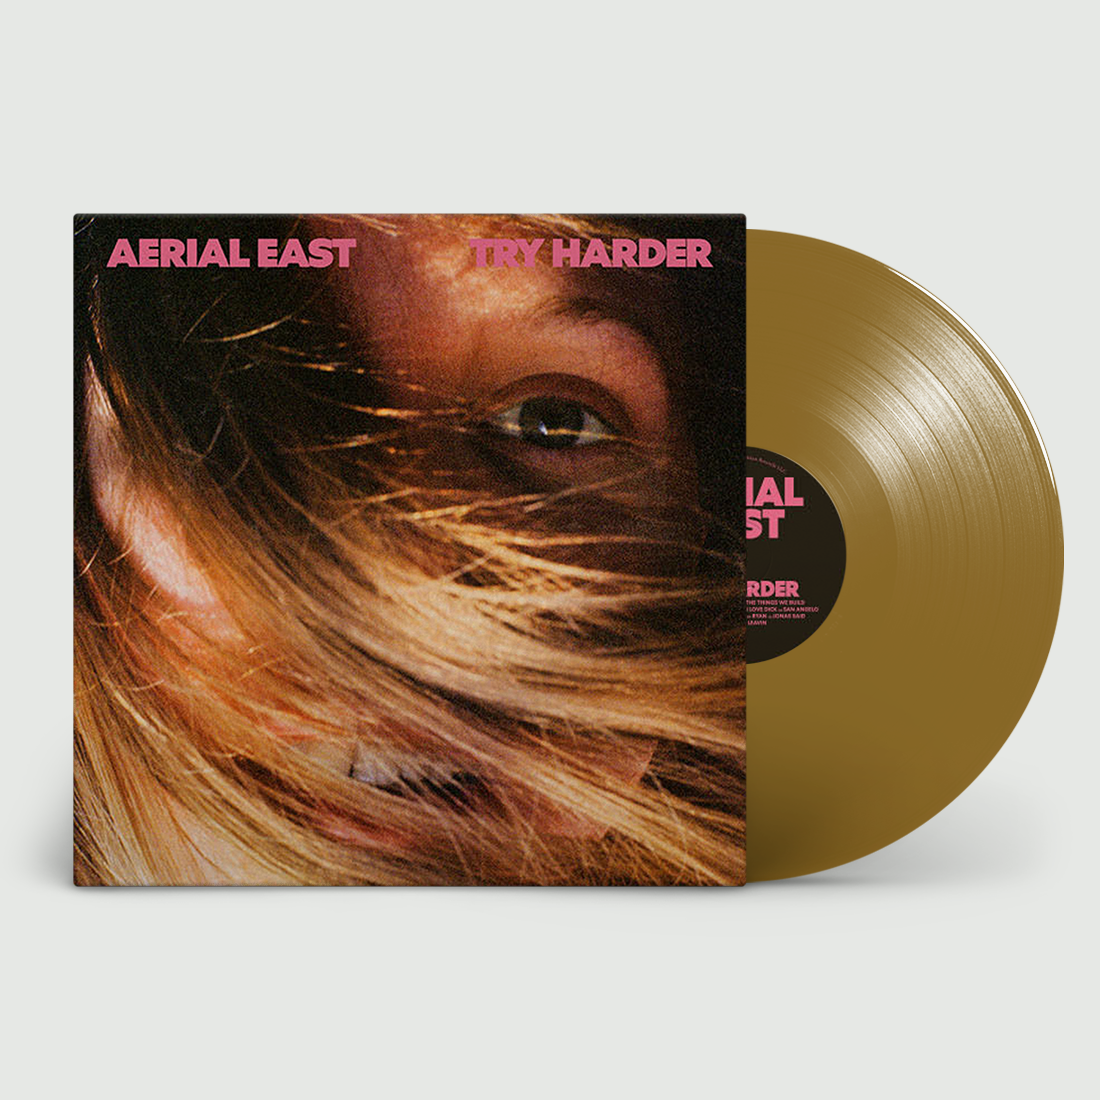 Try Harder: Signed First Pressing Gold Vinyl LP